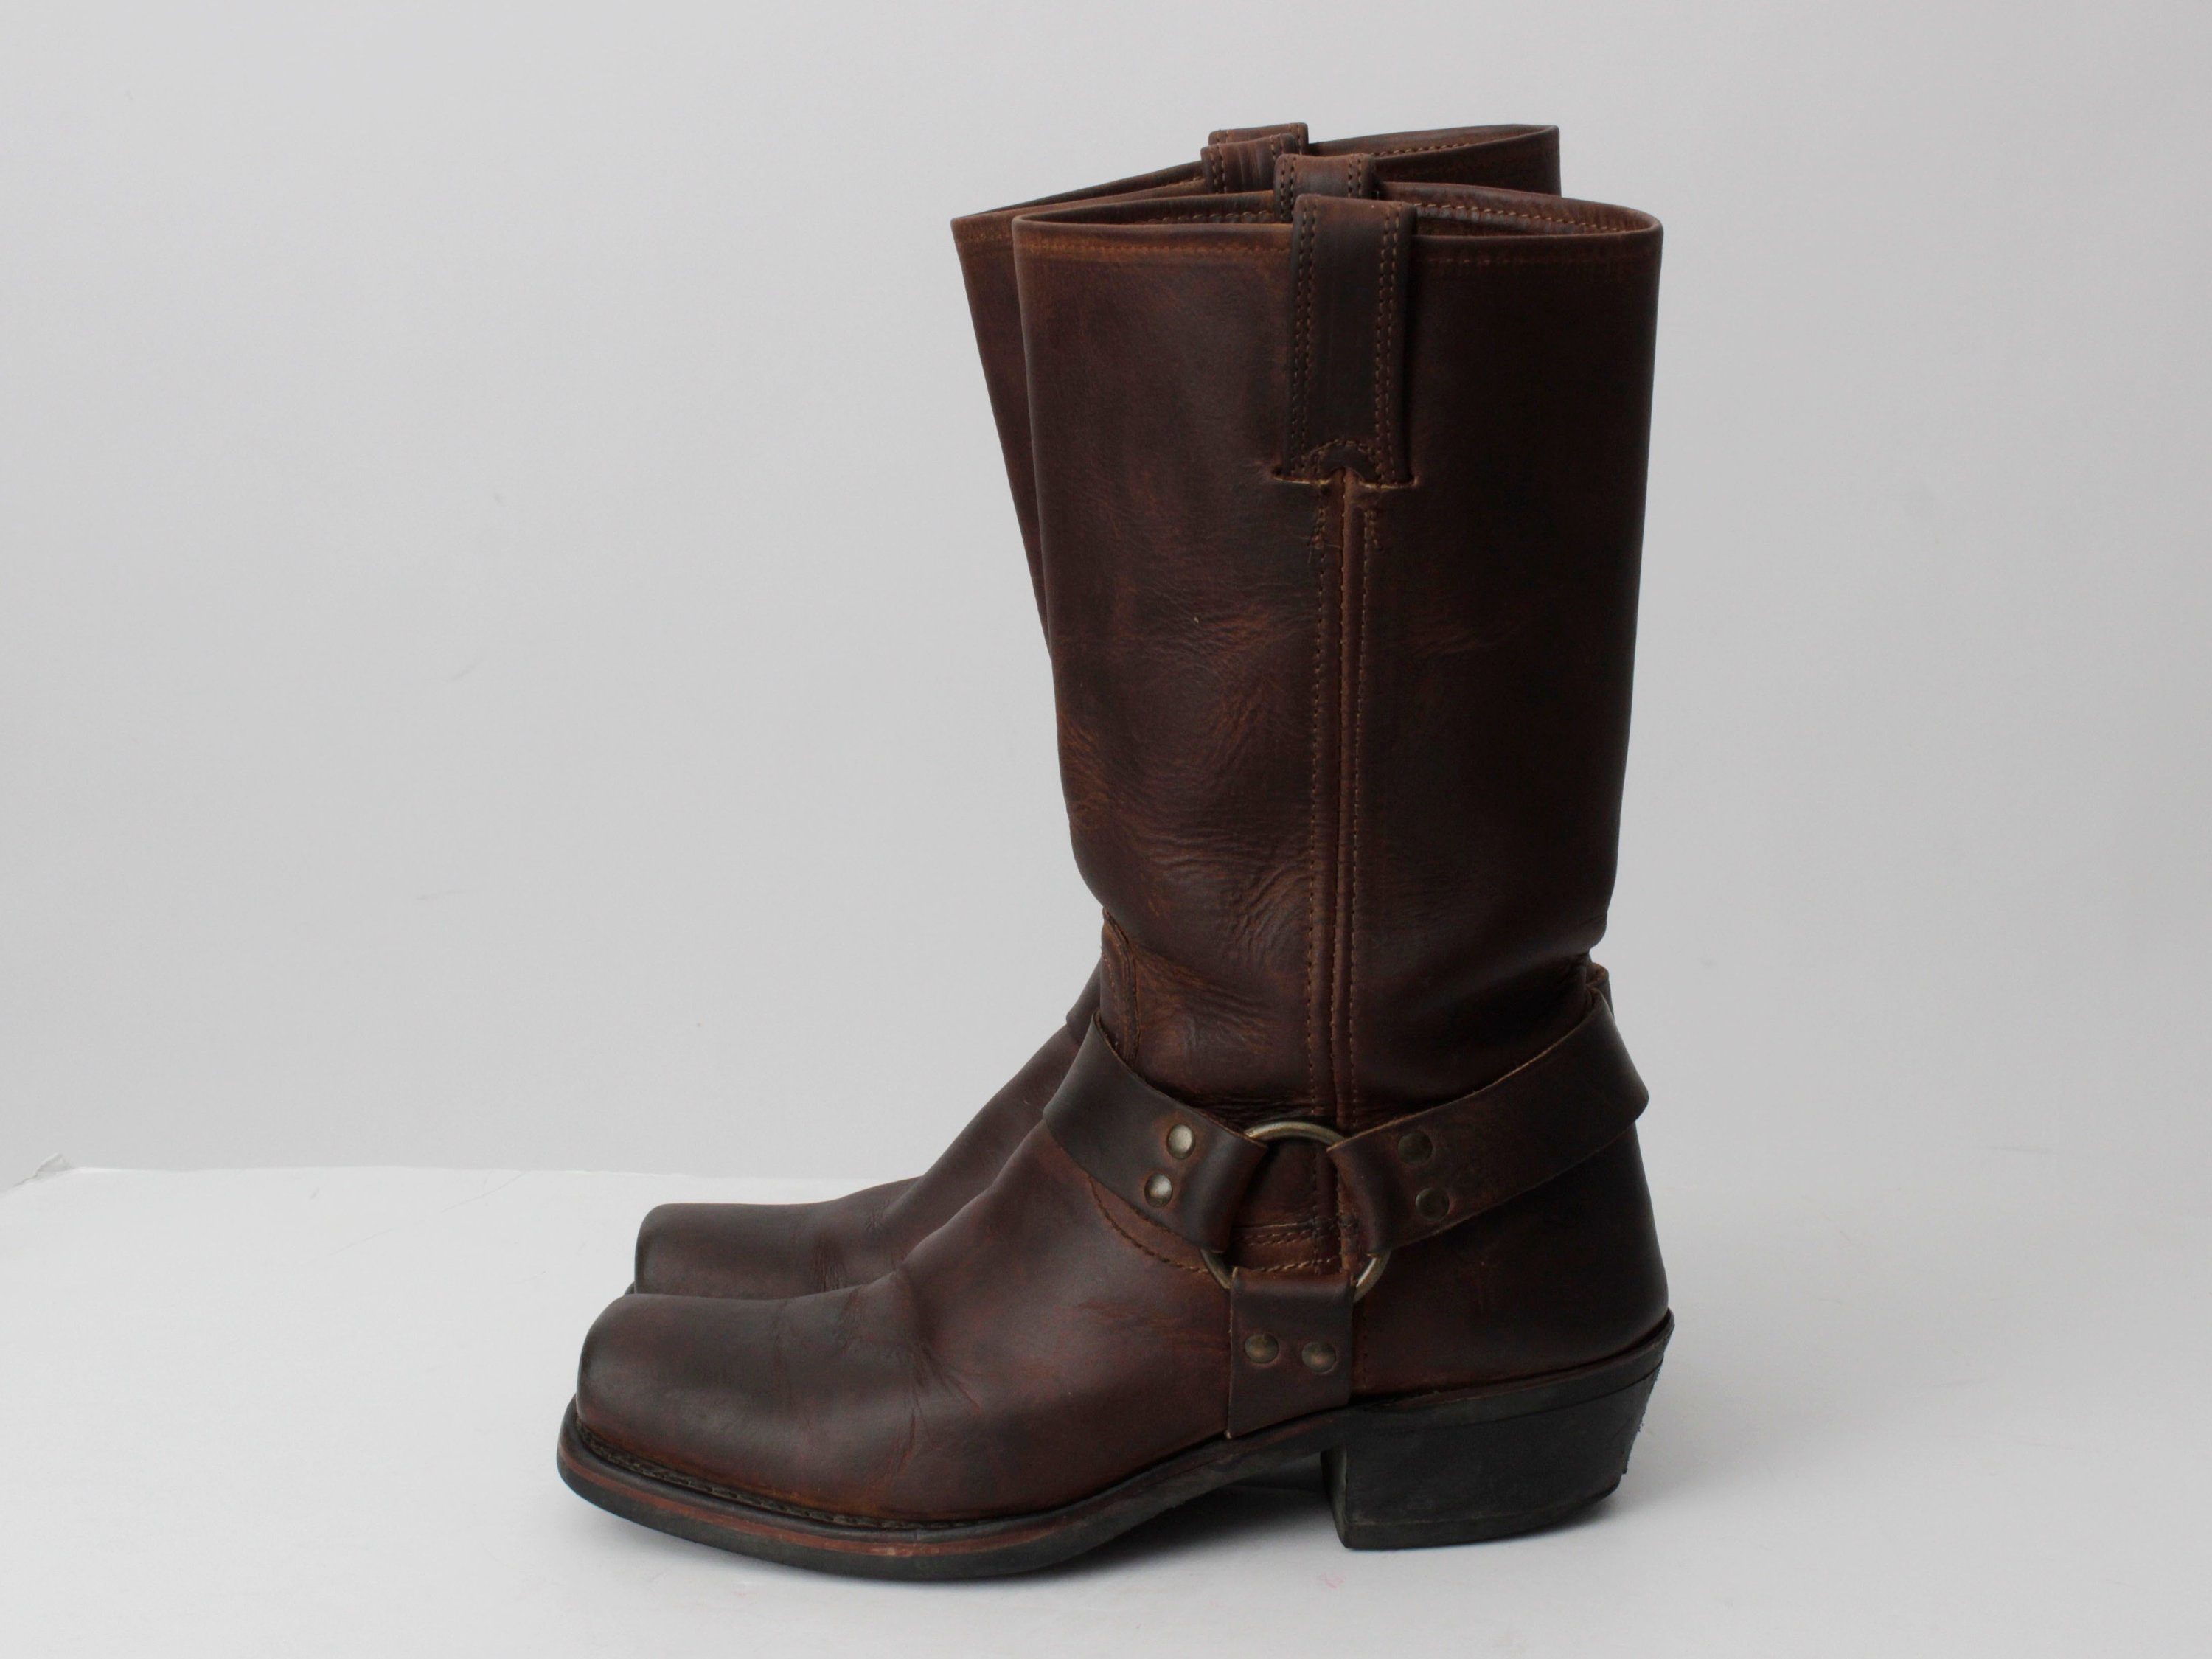 Vintage 1970s Frye Women's Riding Boots Size 6 1/2 - Storage Discoveries